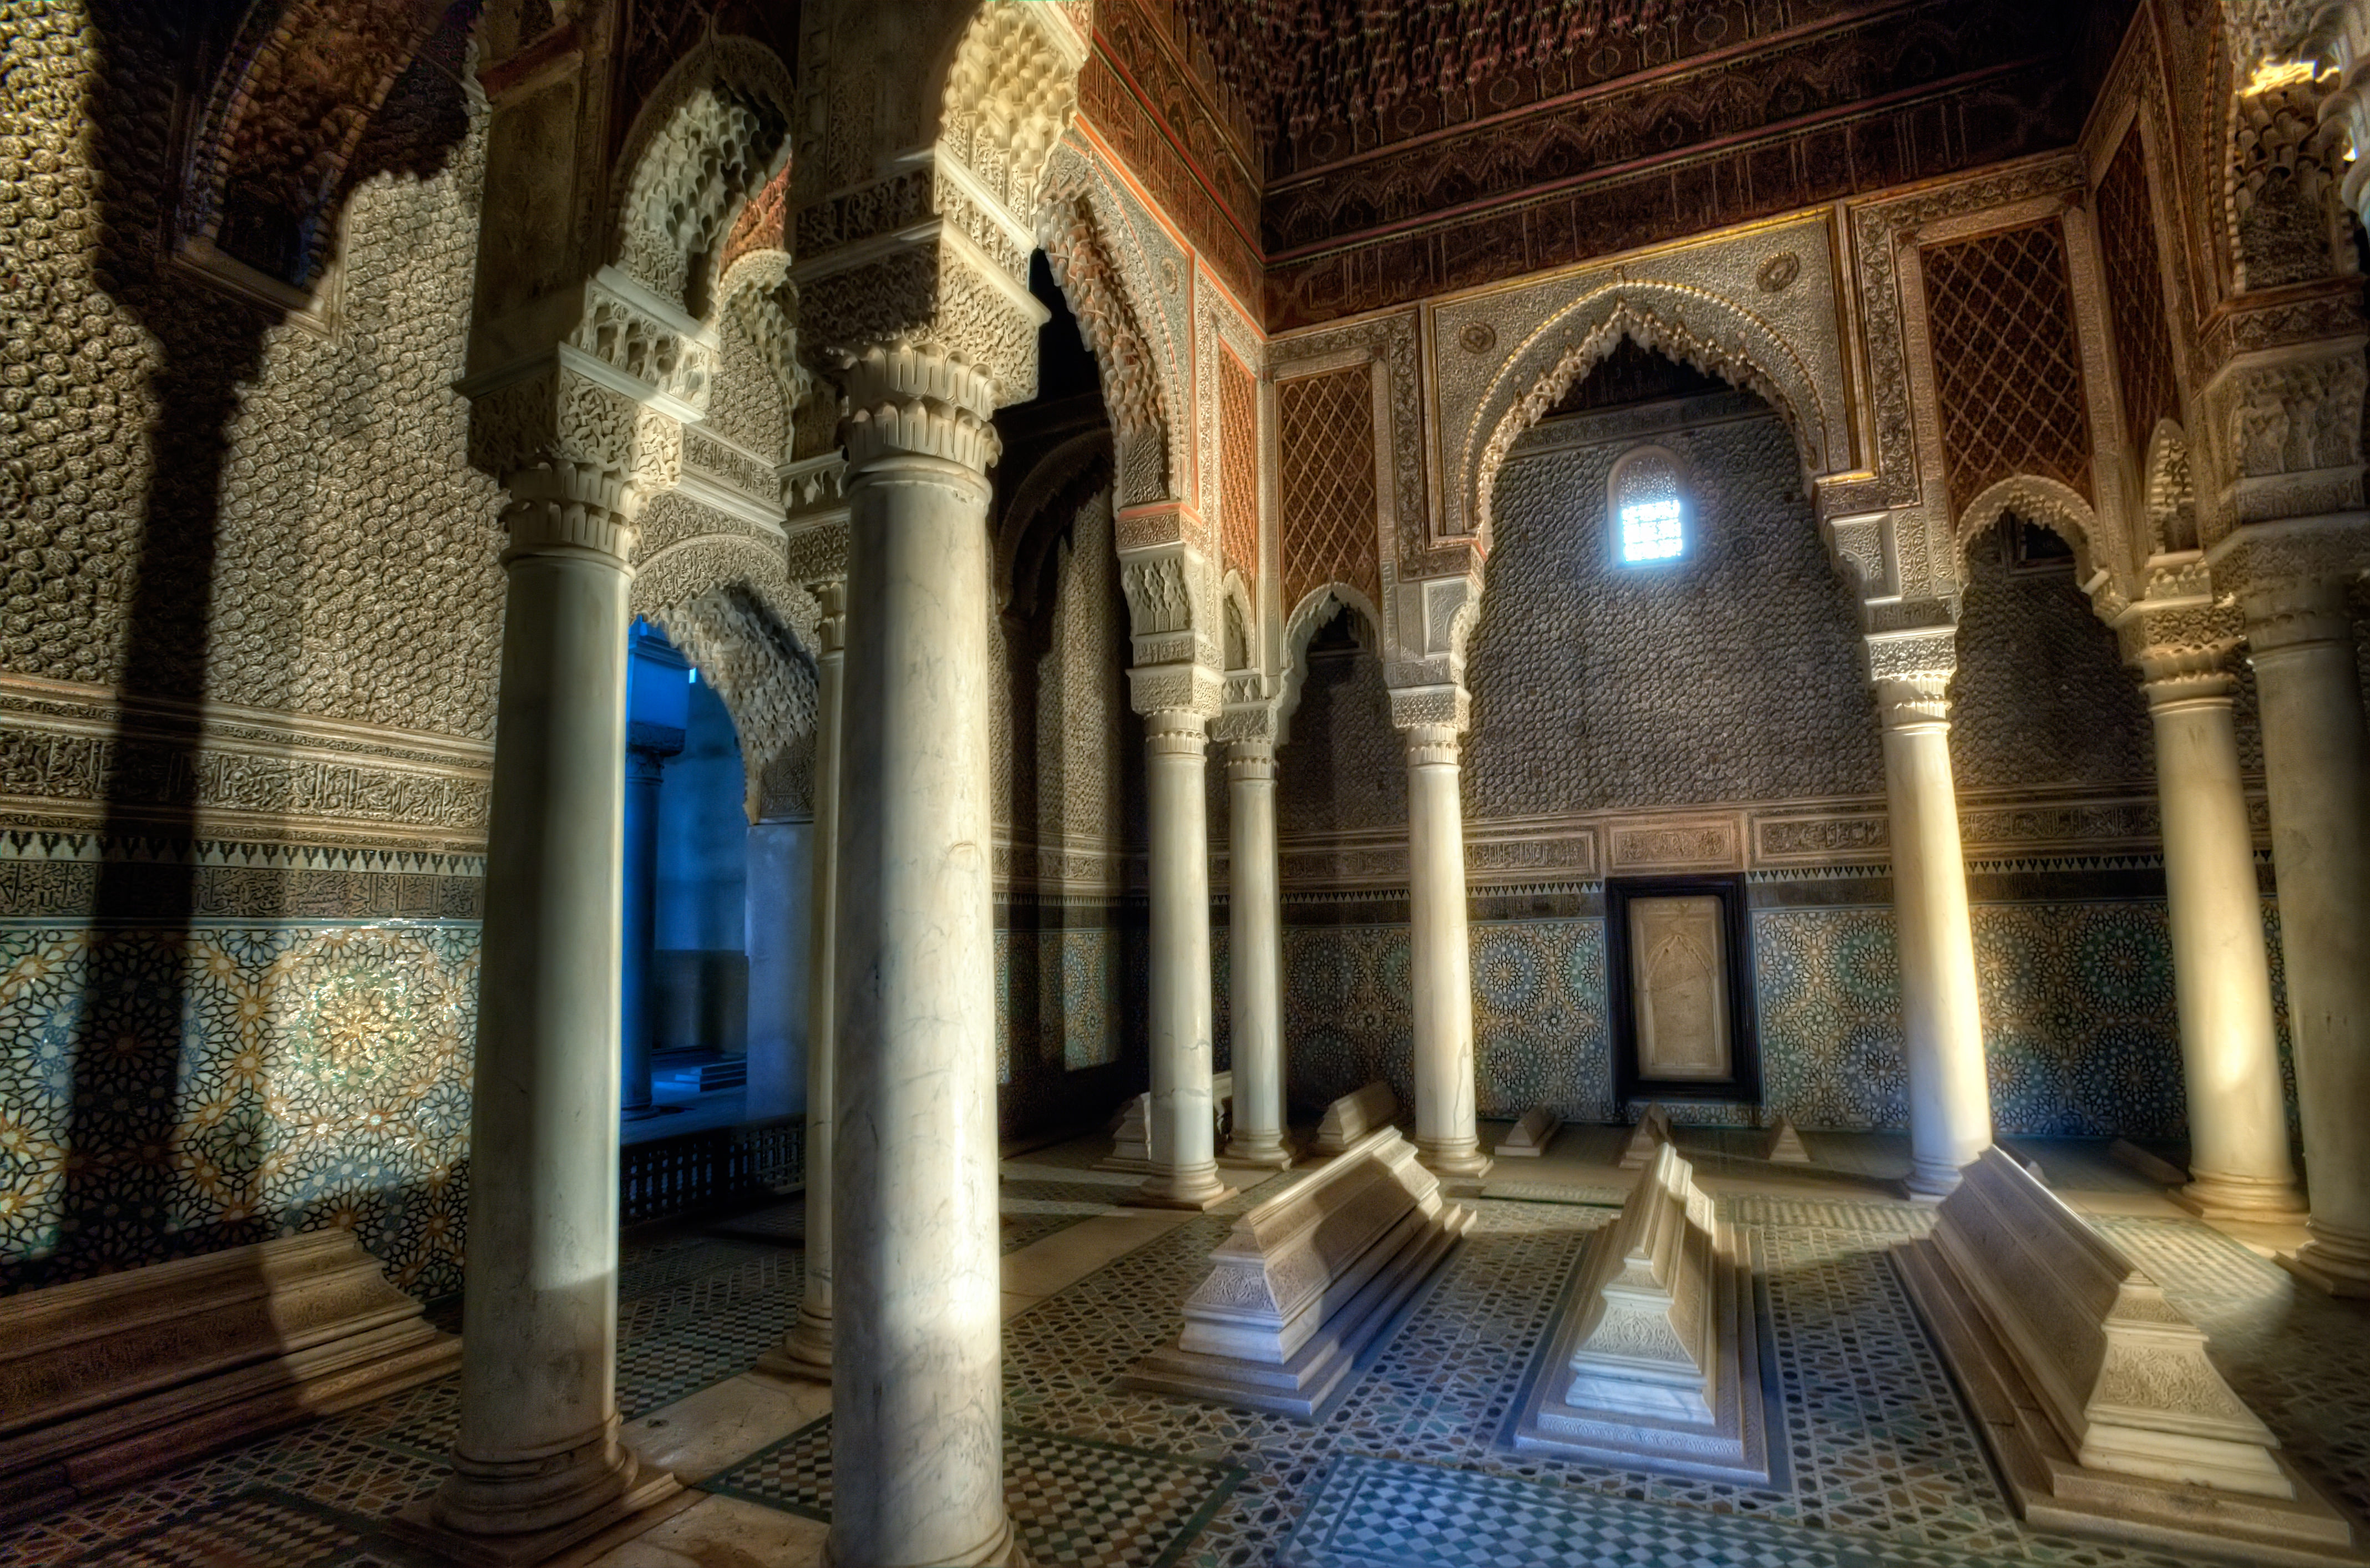 Interior of the Saadian Tombs in Marrakesh, Morocco